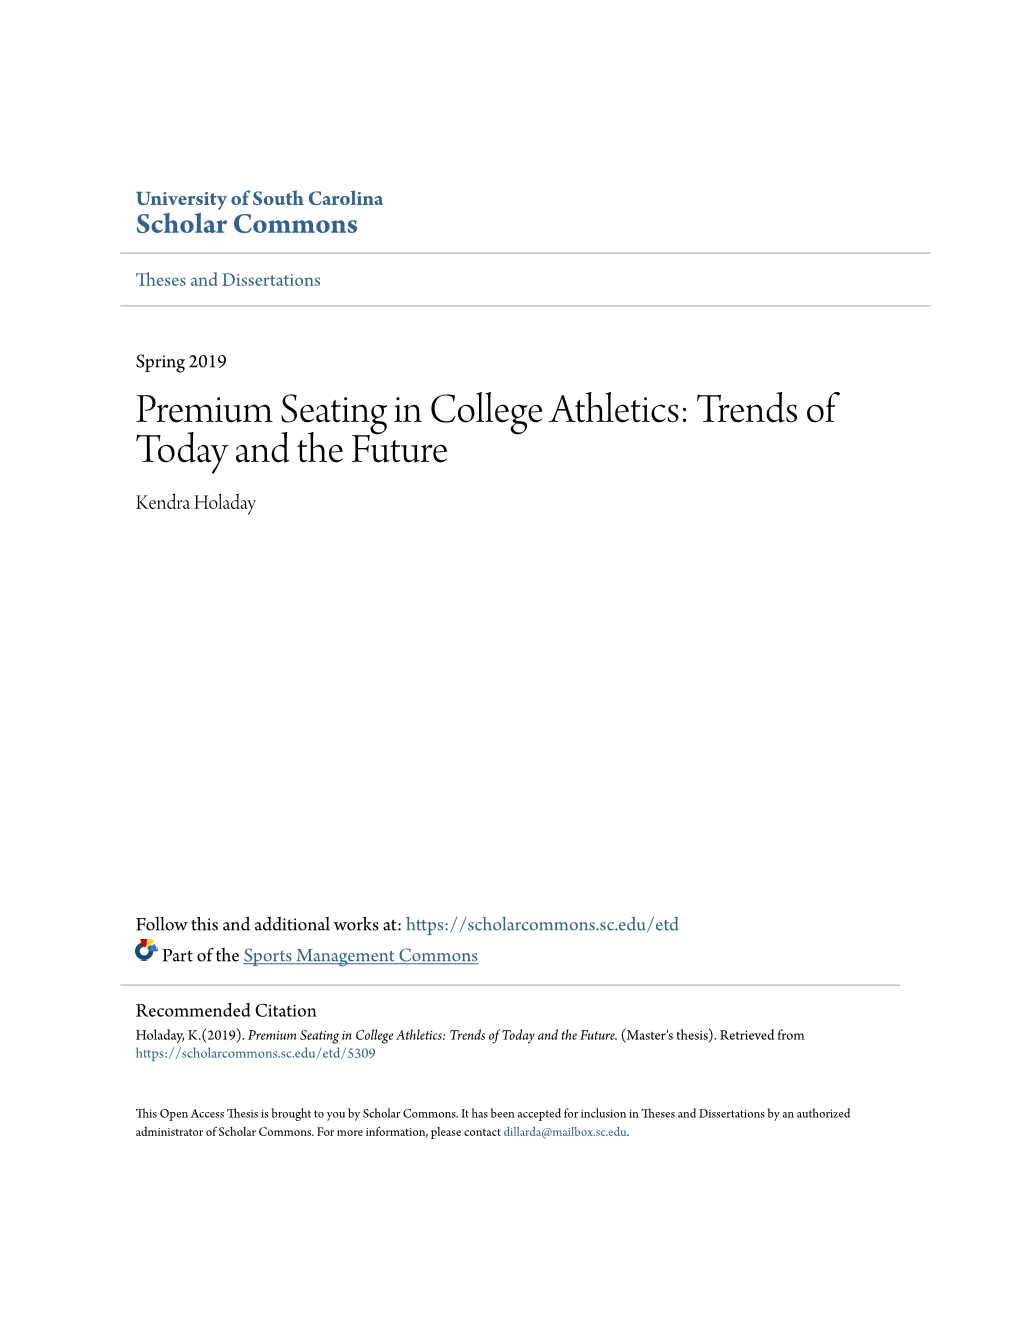 Premium Seating in College Athletics: Trends of Today and the Future Kendra Holaday